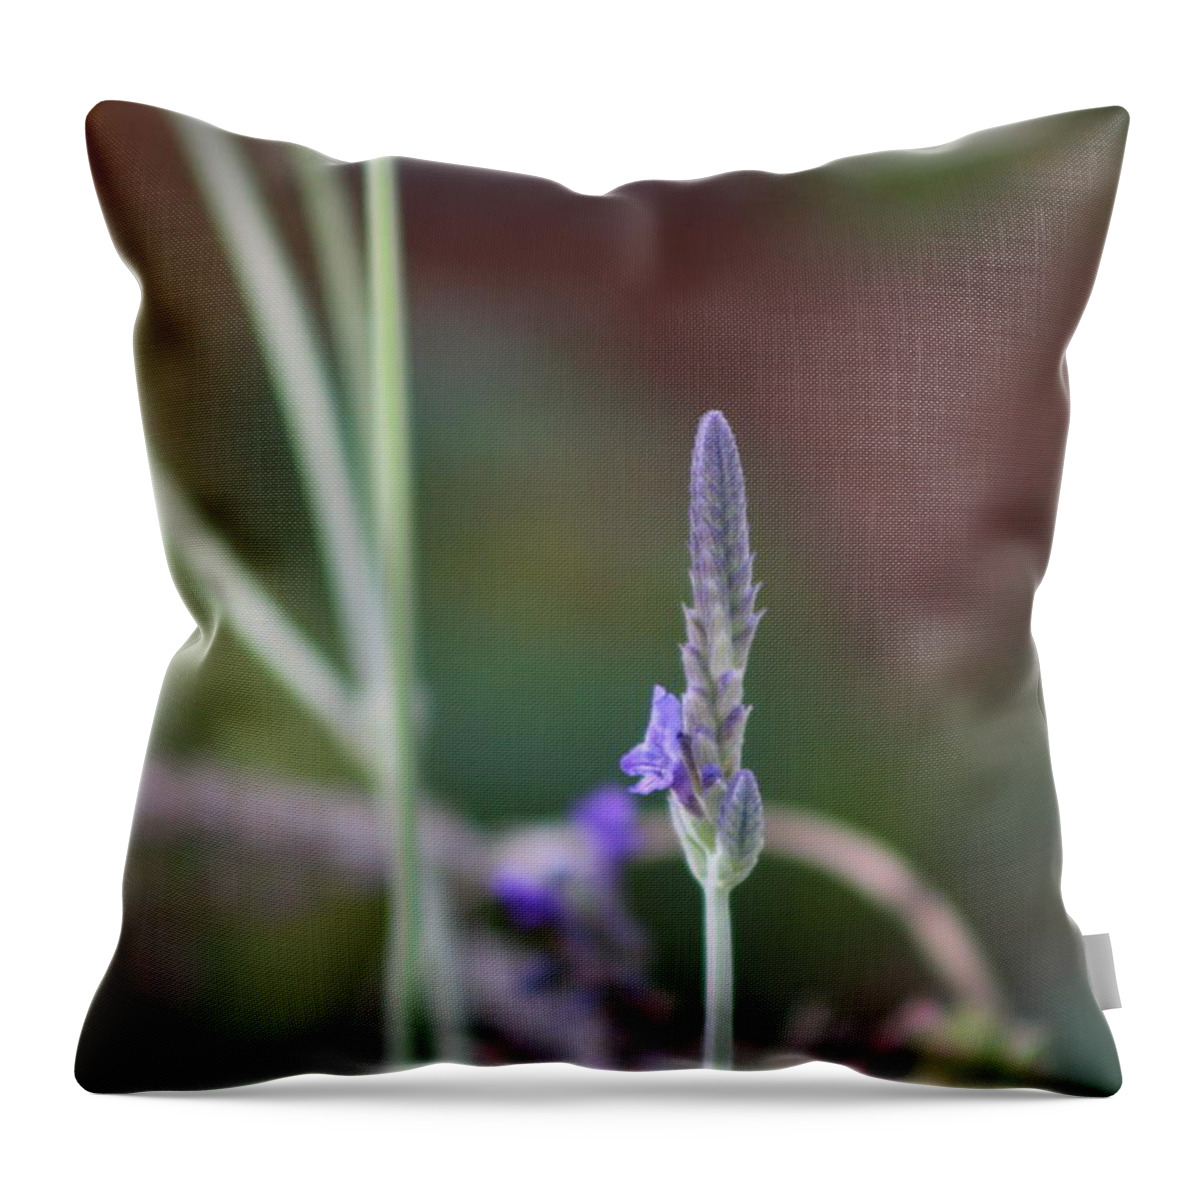 Lavender Throw Pillow featuring the photograph Lavender Spike Against Barn Red by Colleen Cornelius